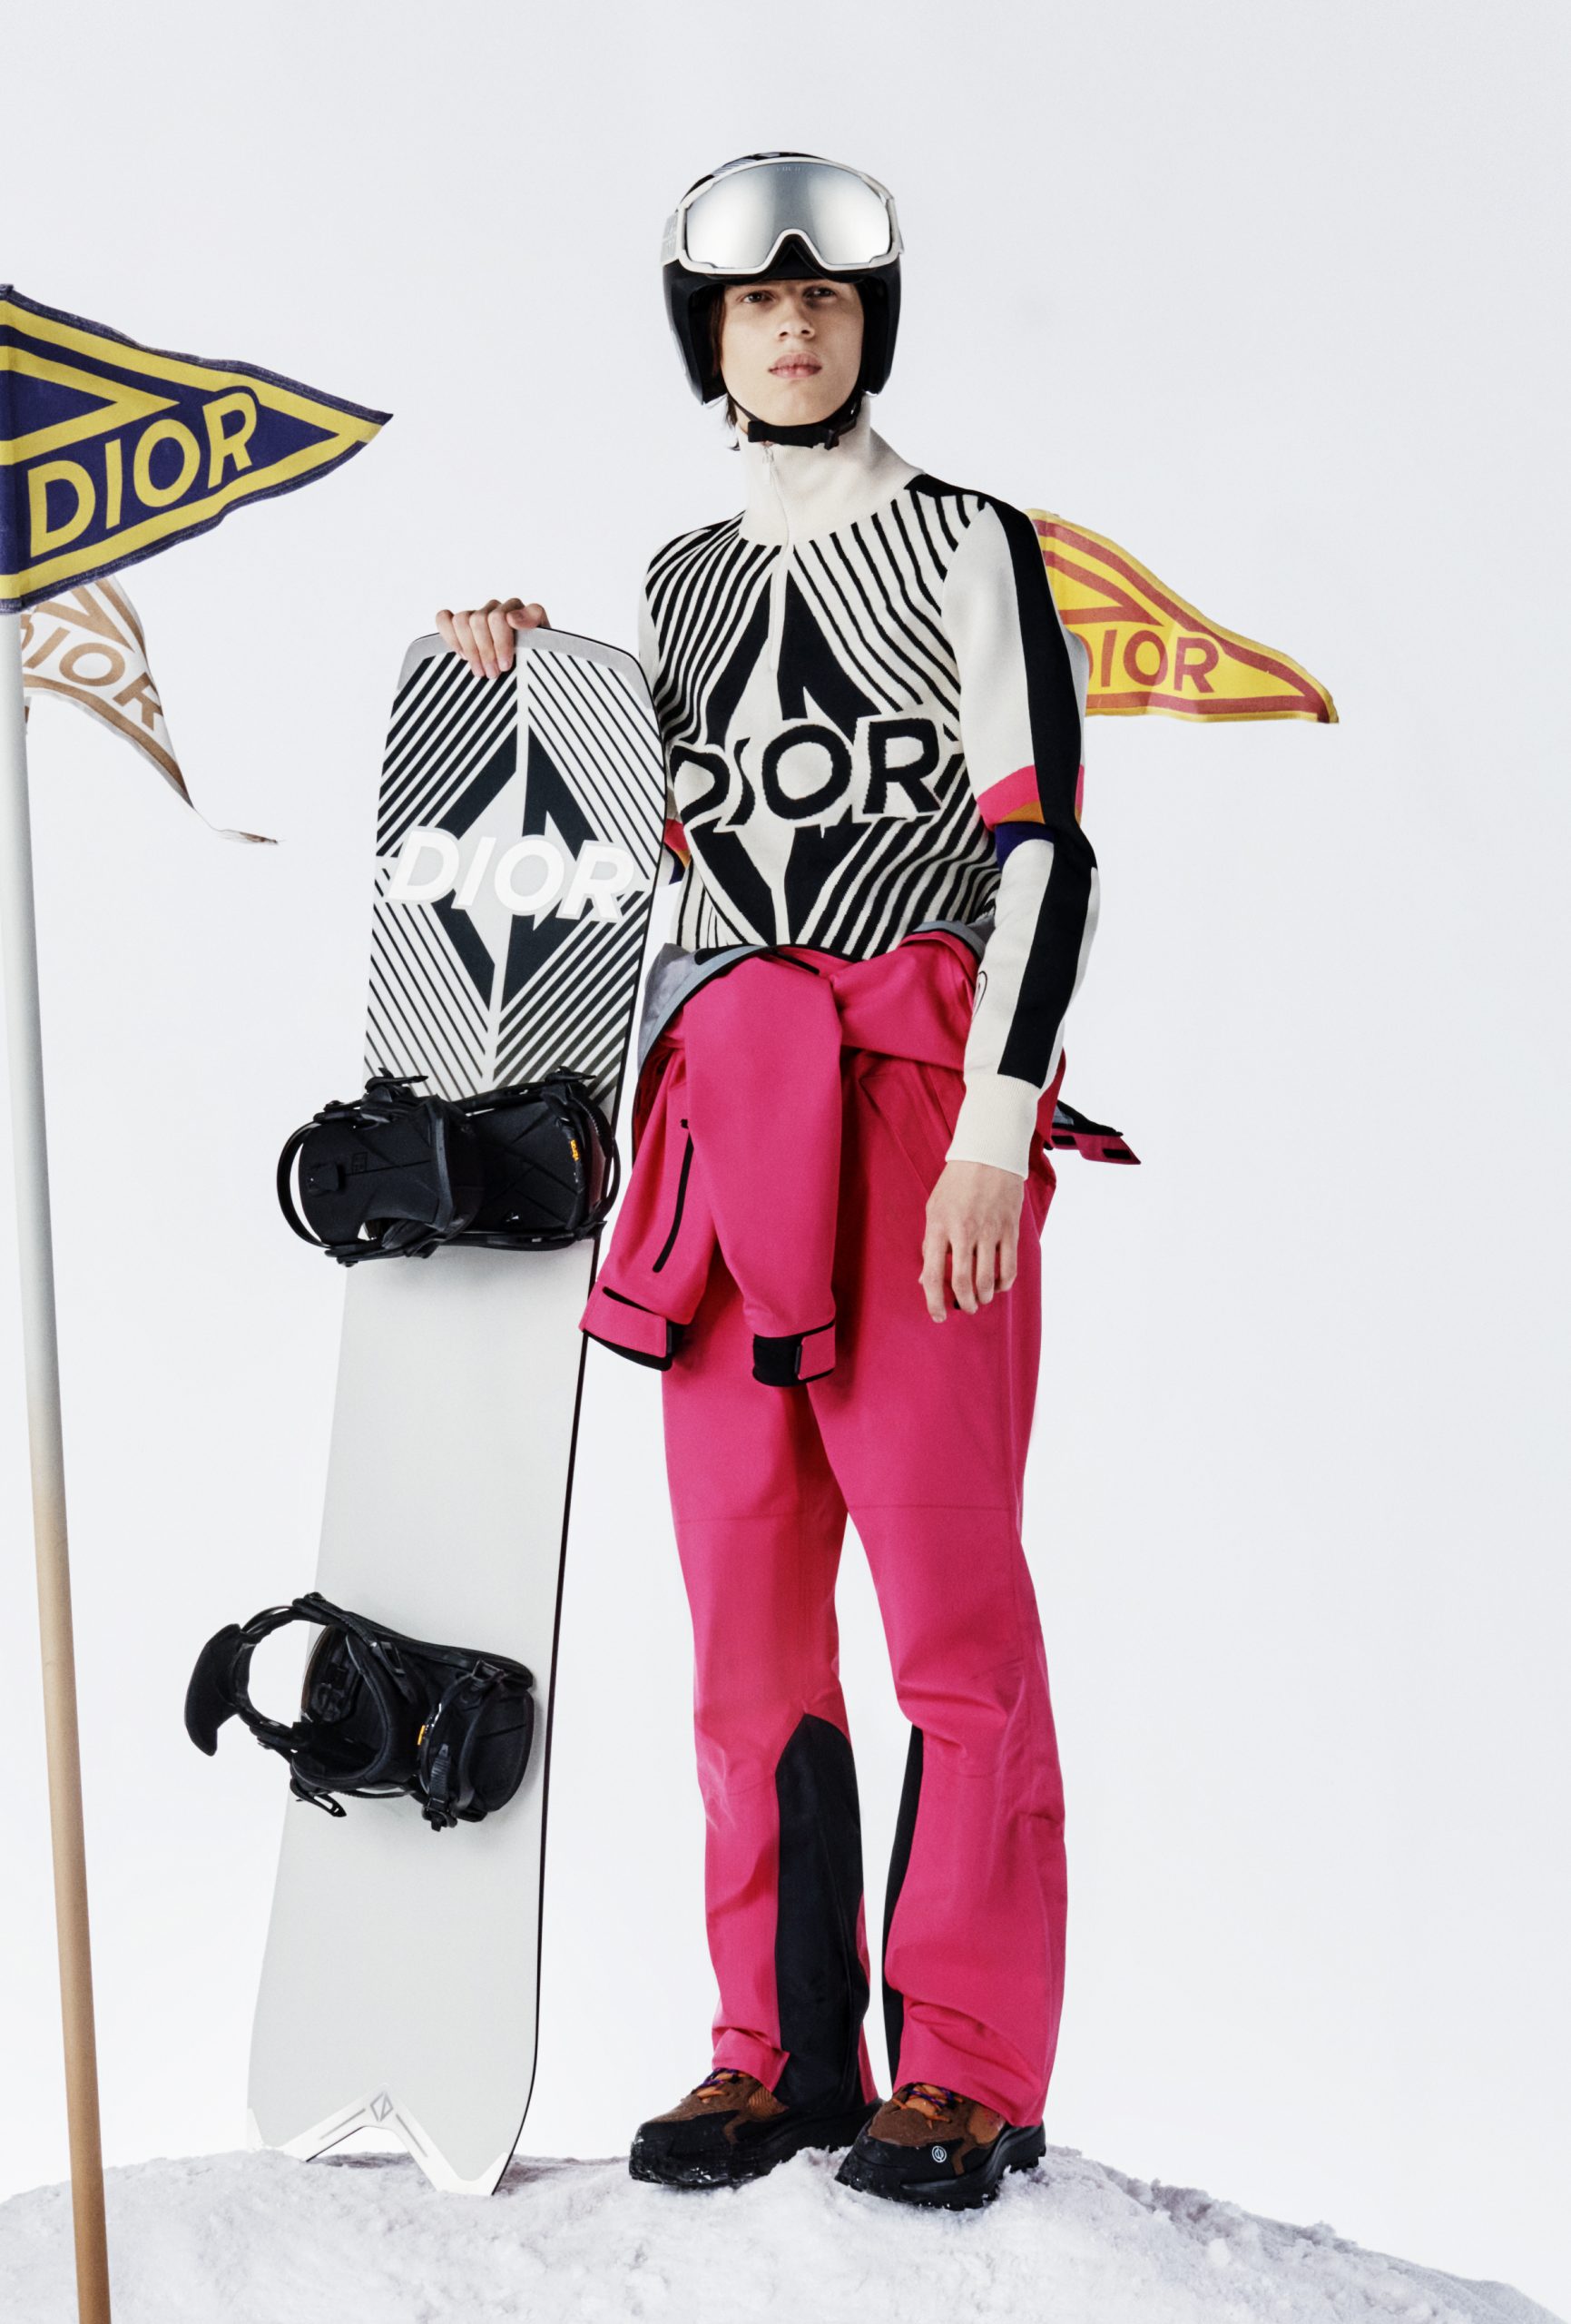 Dior's Spring 2023 Ski Capsule Scales New Heights With Luxury Performance Wear